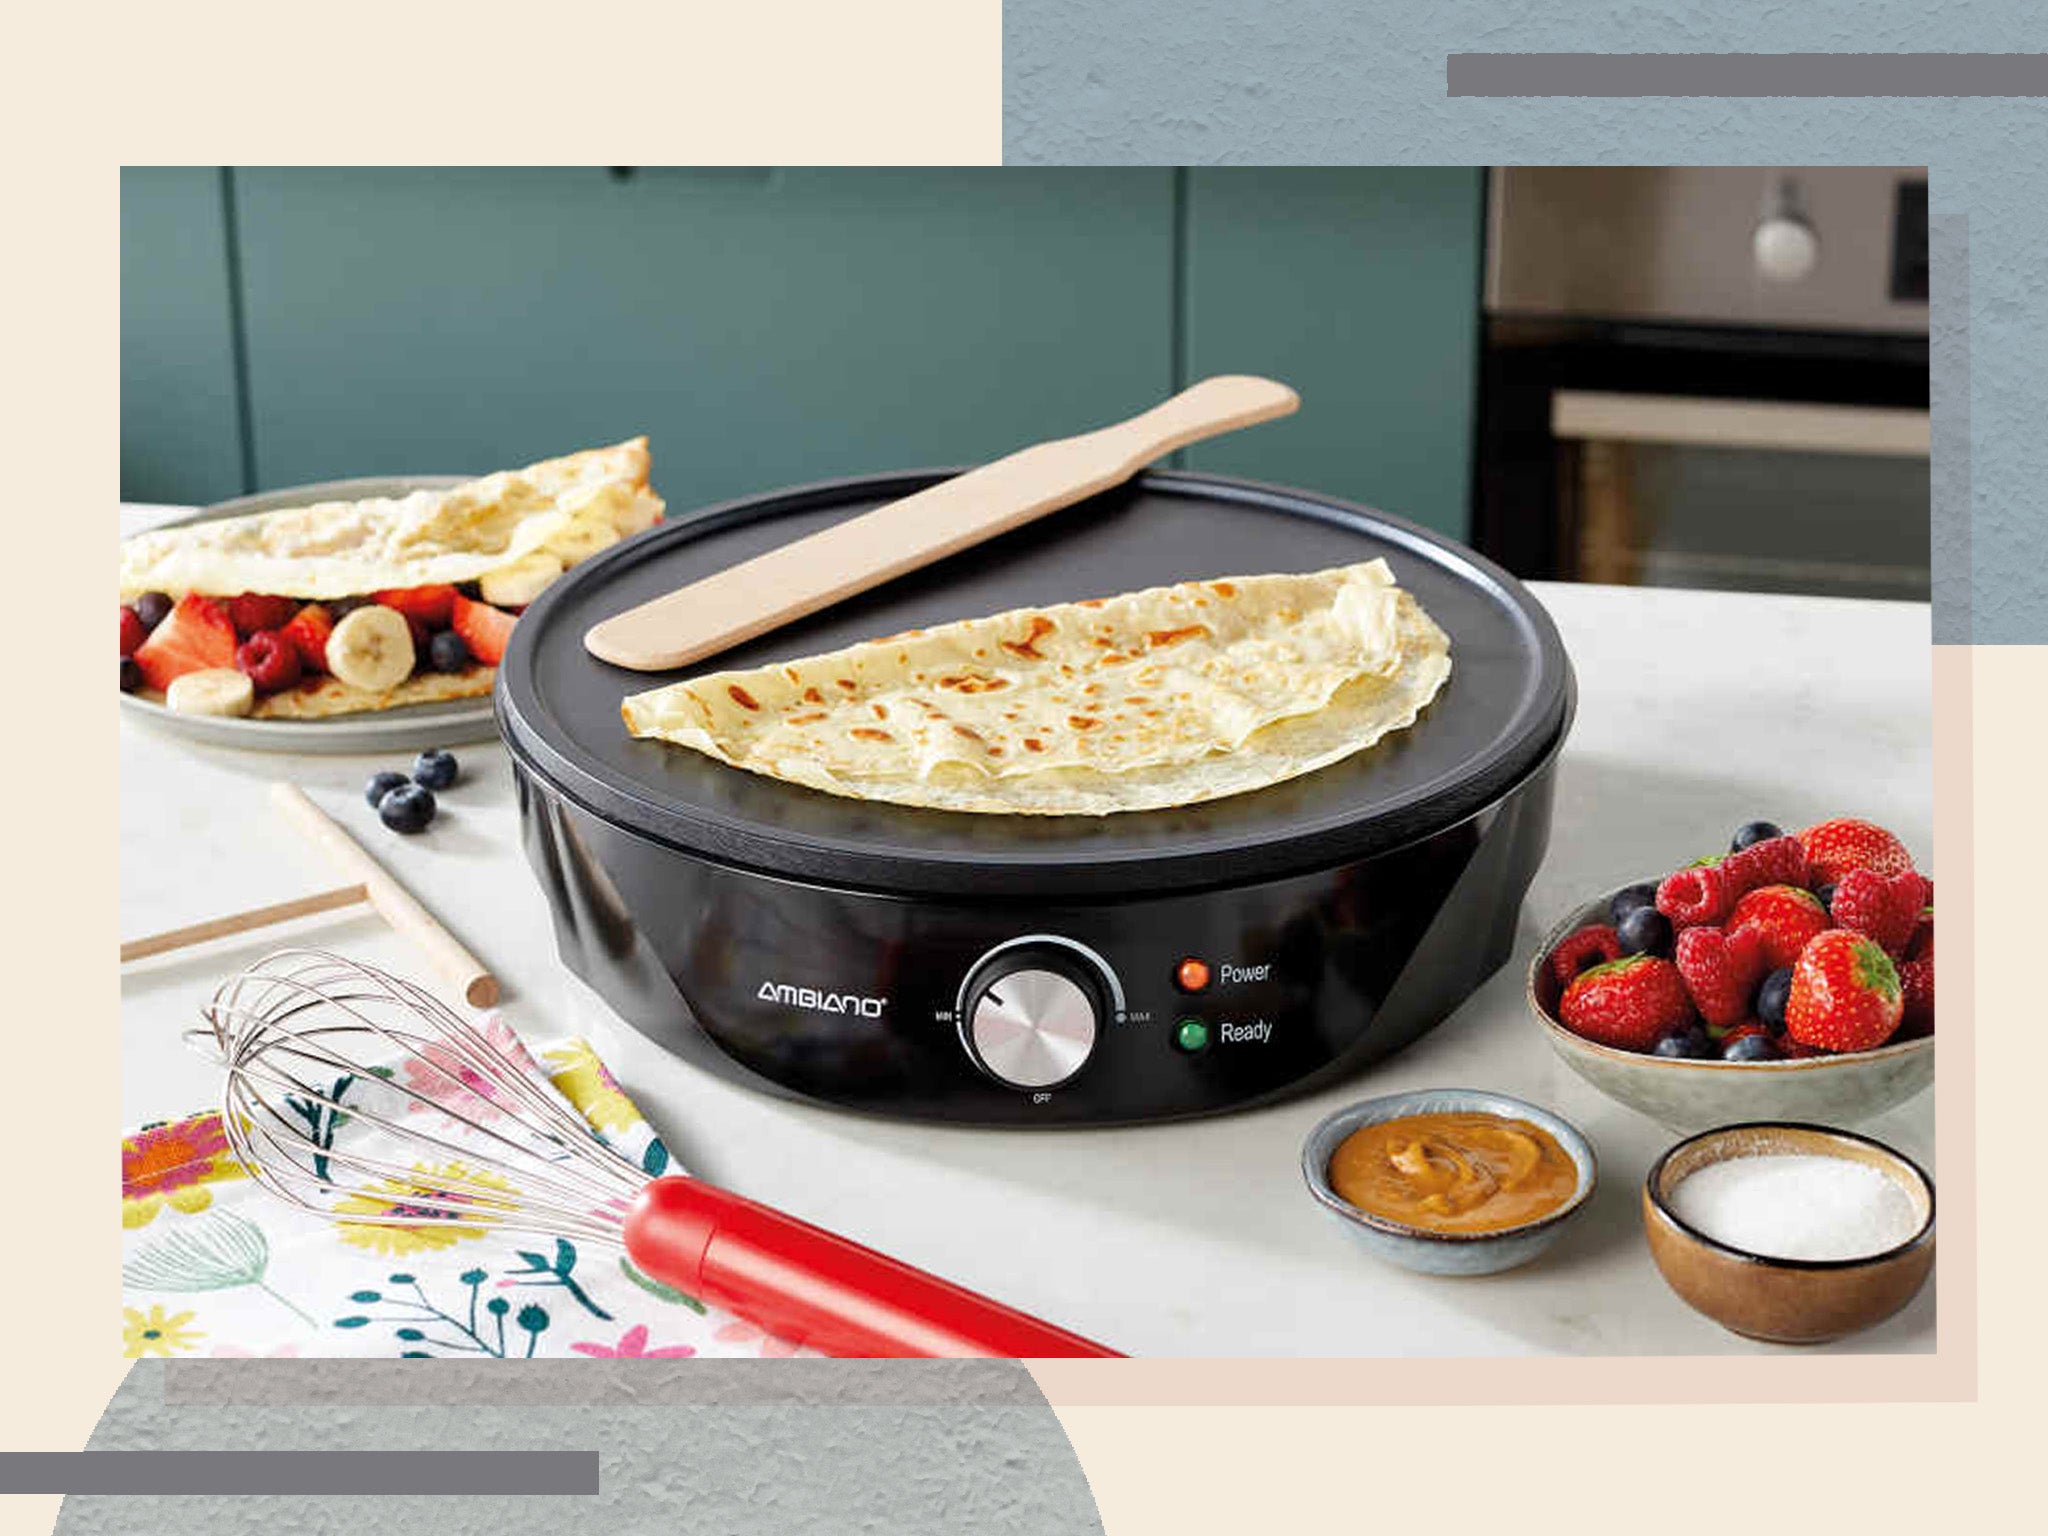 Recreate that authentic French crêperie experience at home with this pocket-friendly appliance